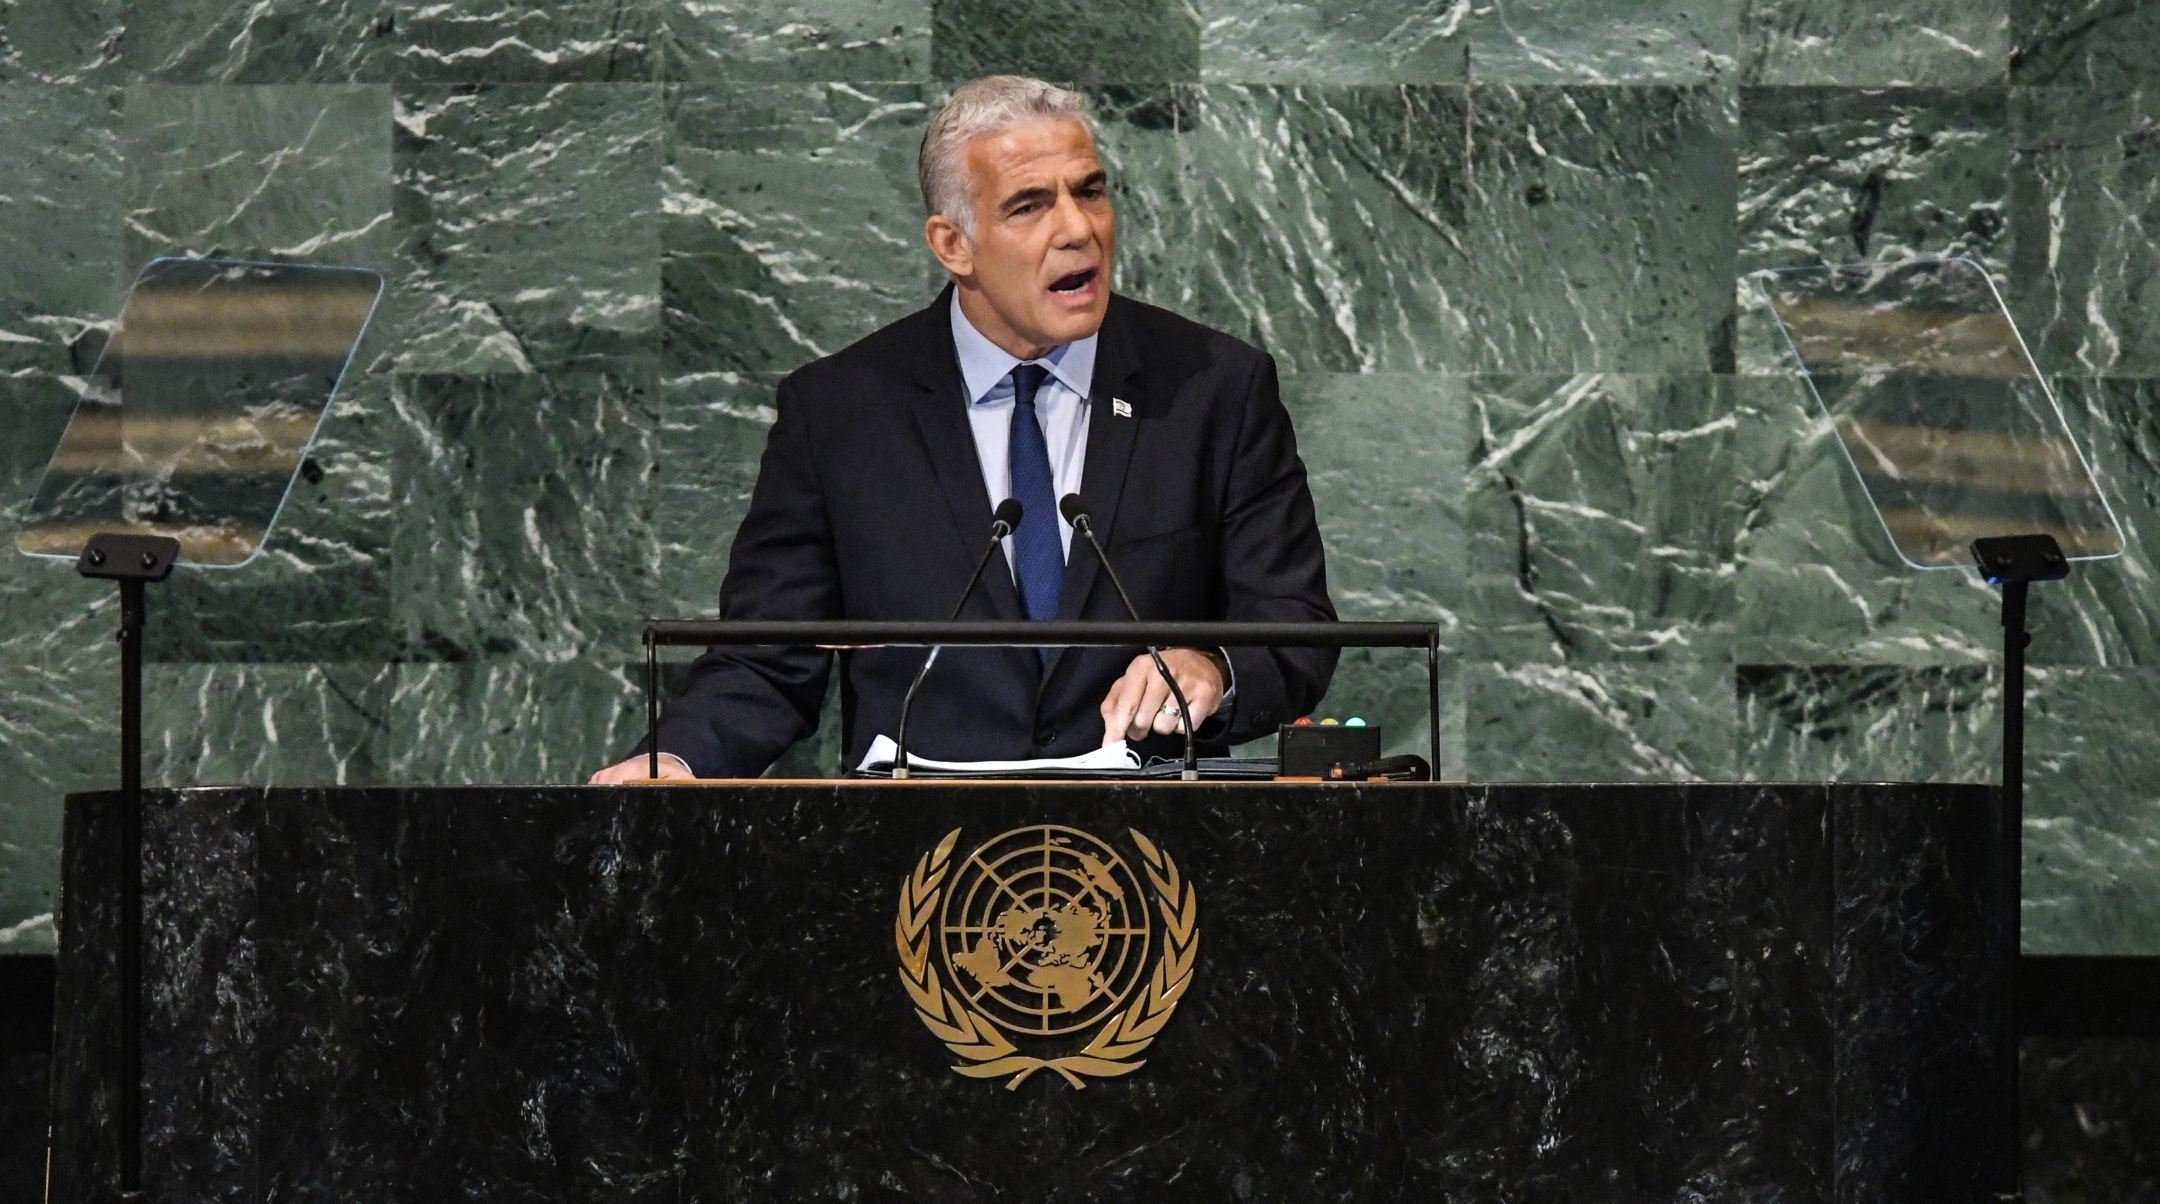 Yair Lapid recommits Israel to the two-state solution in UN speech